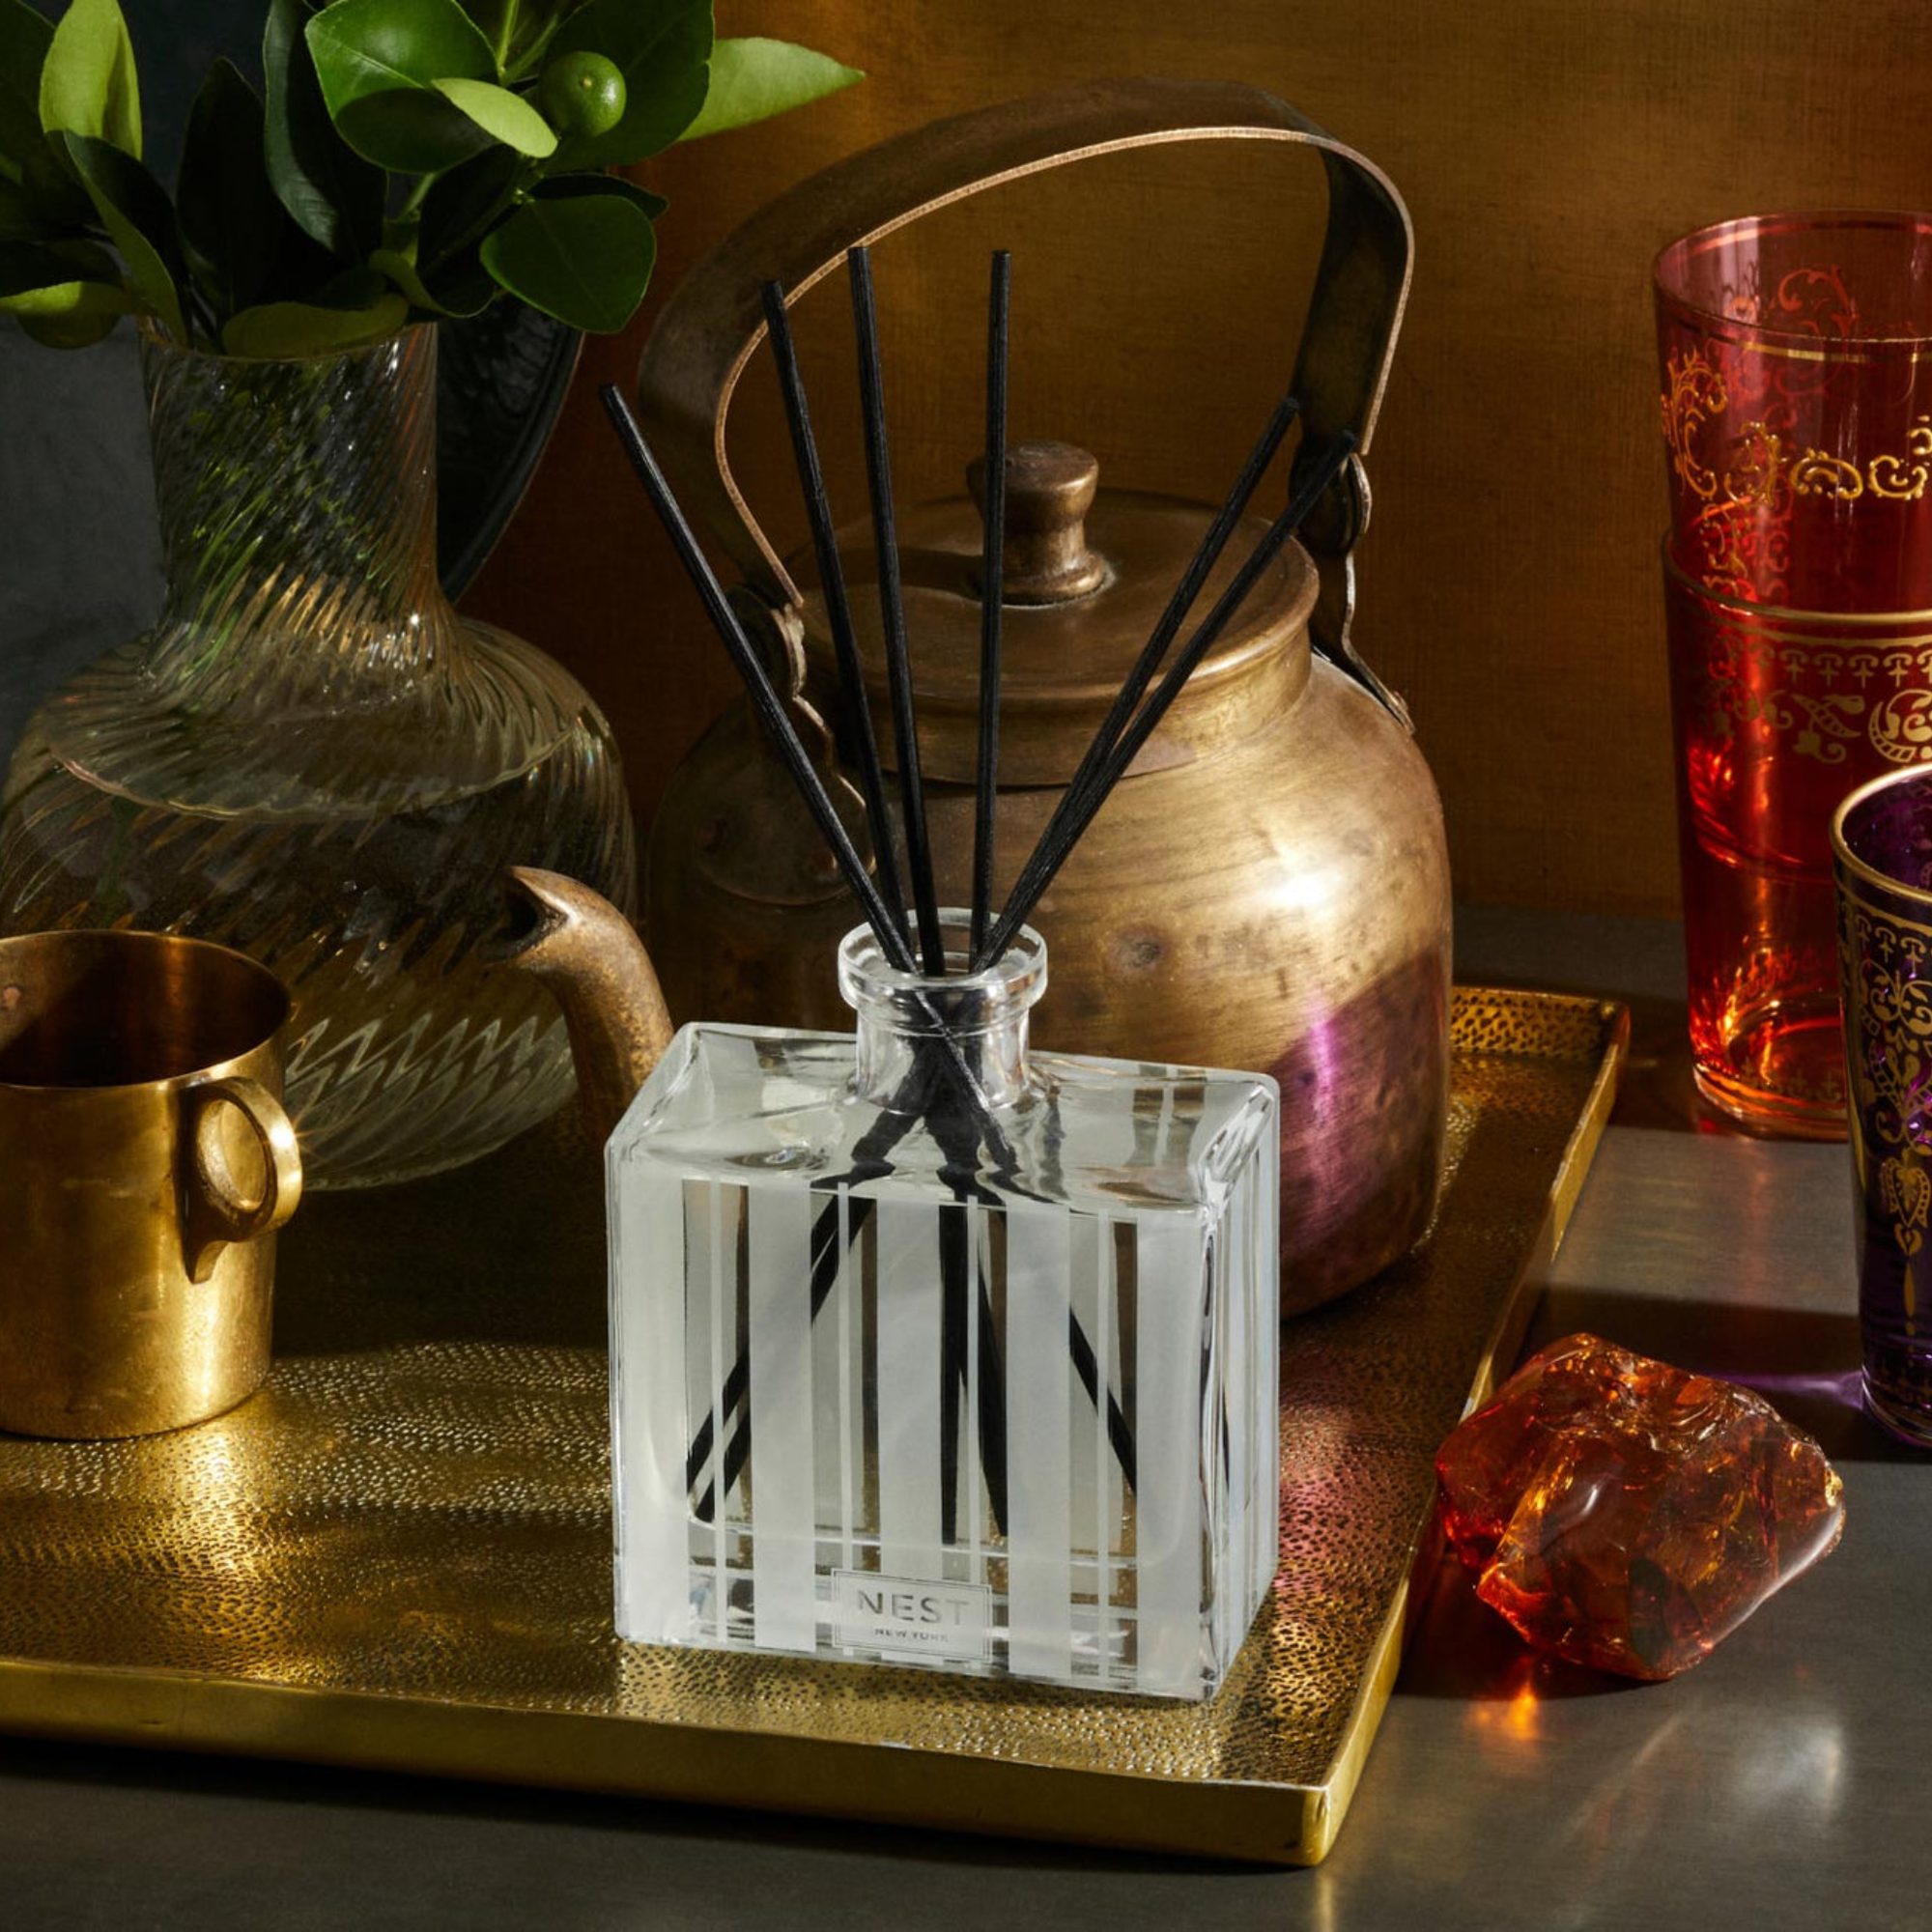 Nest New York’s Moroccan Amber Diffuser Lifestyle in Tray on Counter